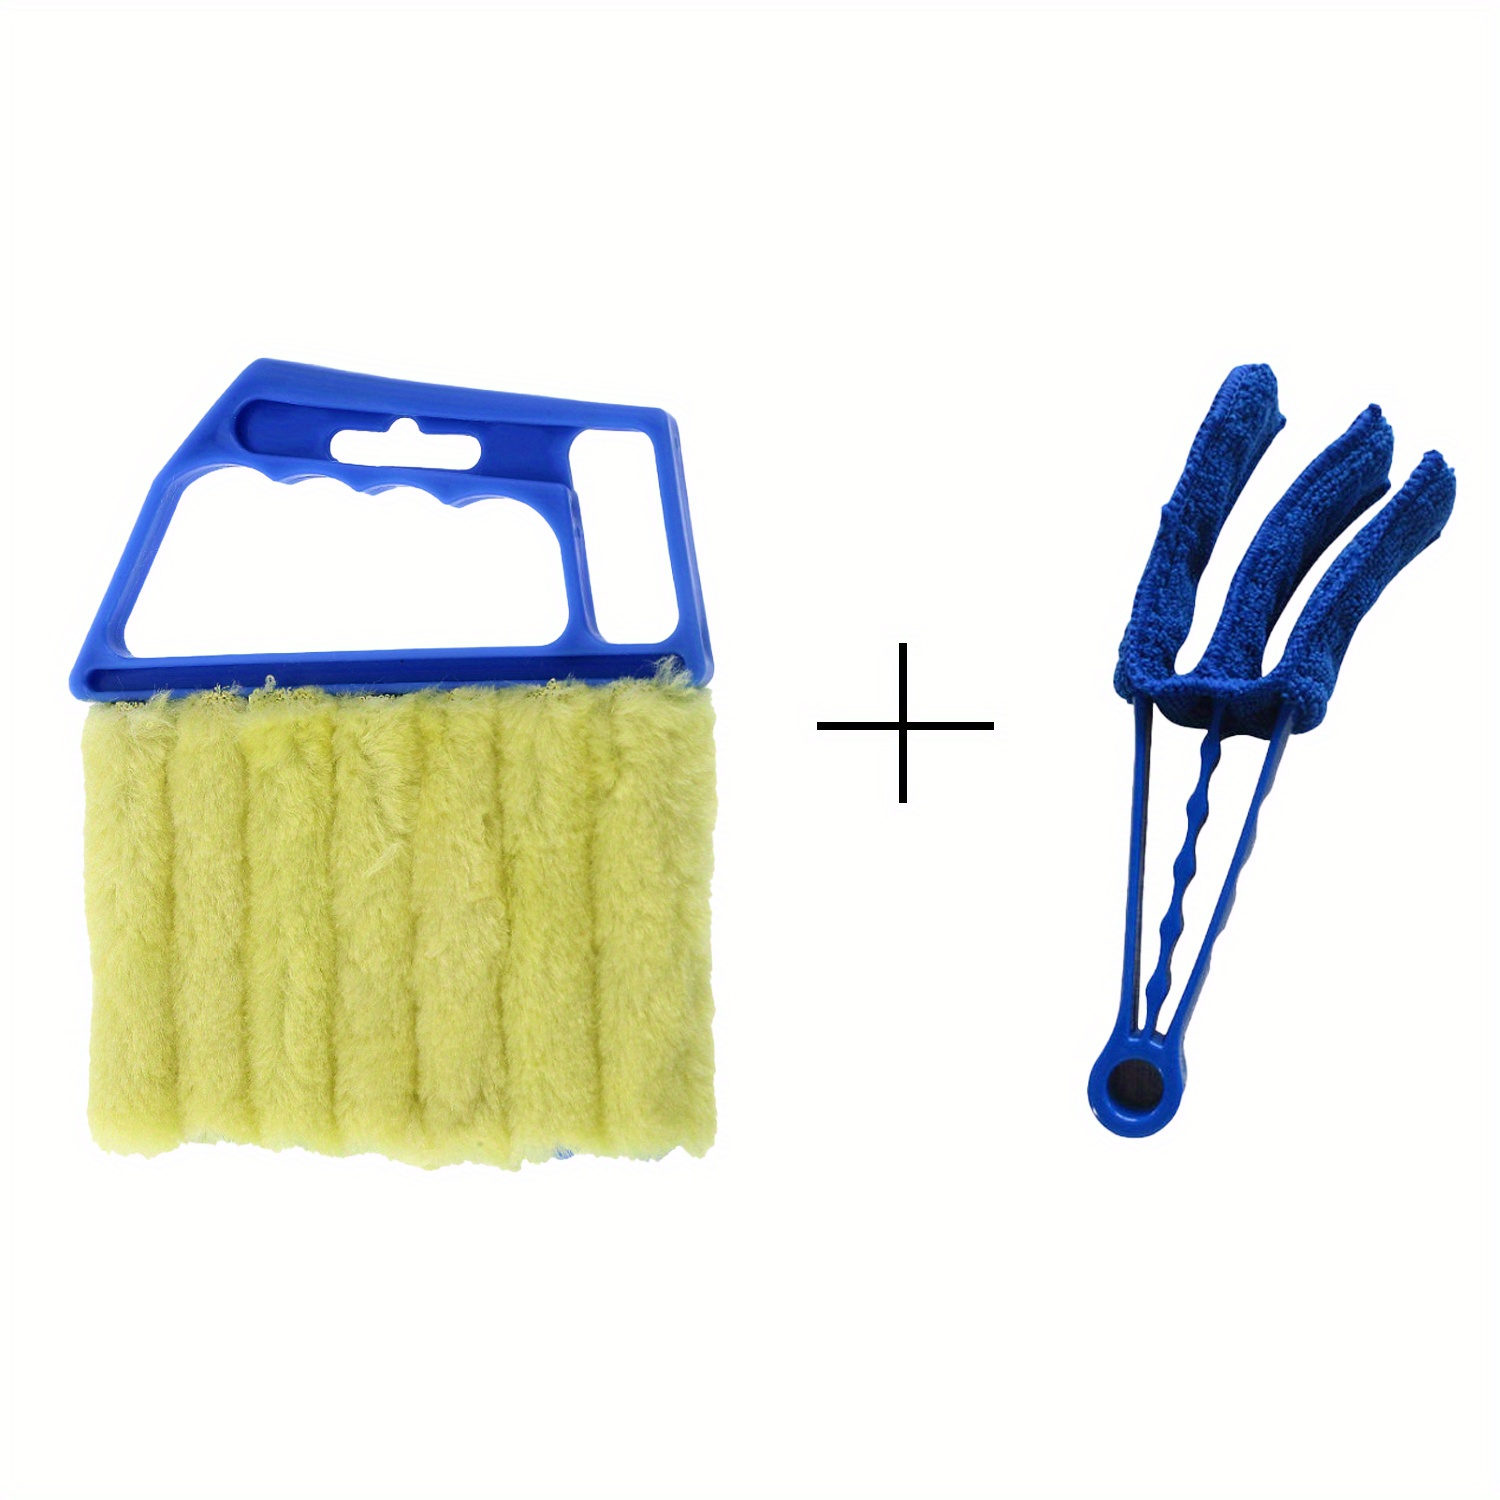  Healeved Blind Cleaning Brush Paintbrush Cleaners Mini Vacuum  Cleaner for Home Microfiber Duster Shutter Blind Cleaner Gadgets for Home  Shutter Brush Cleaning Tool Cleaner Brush for Window : Health & Household